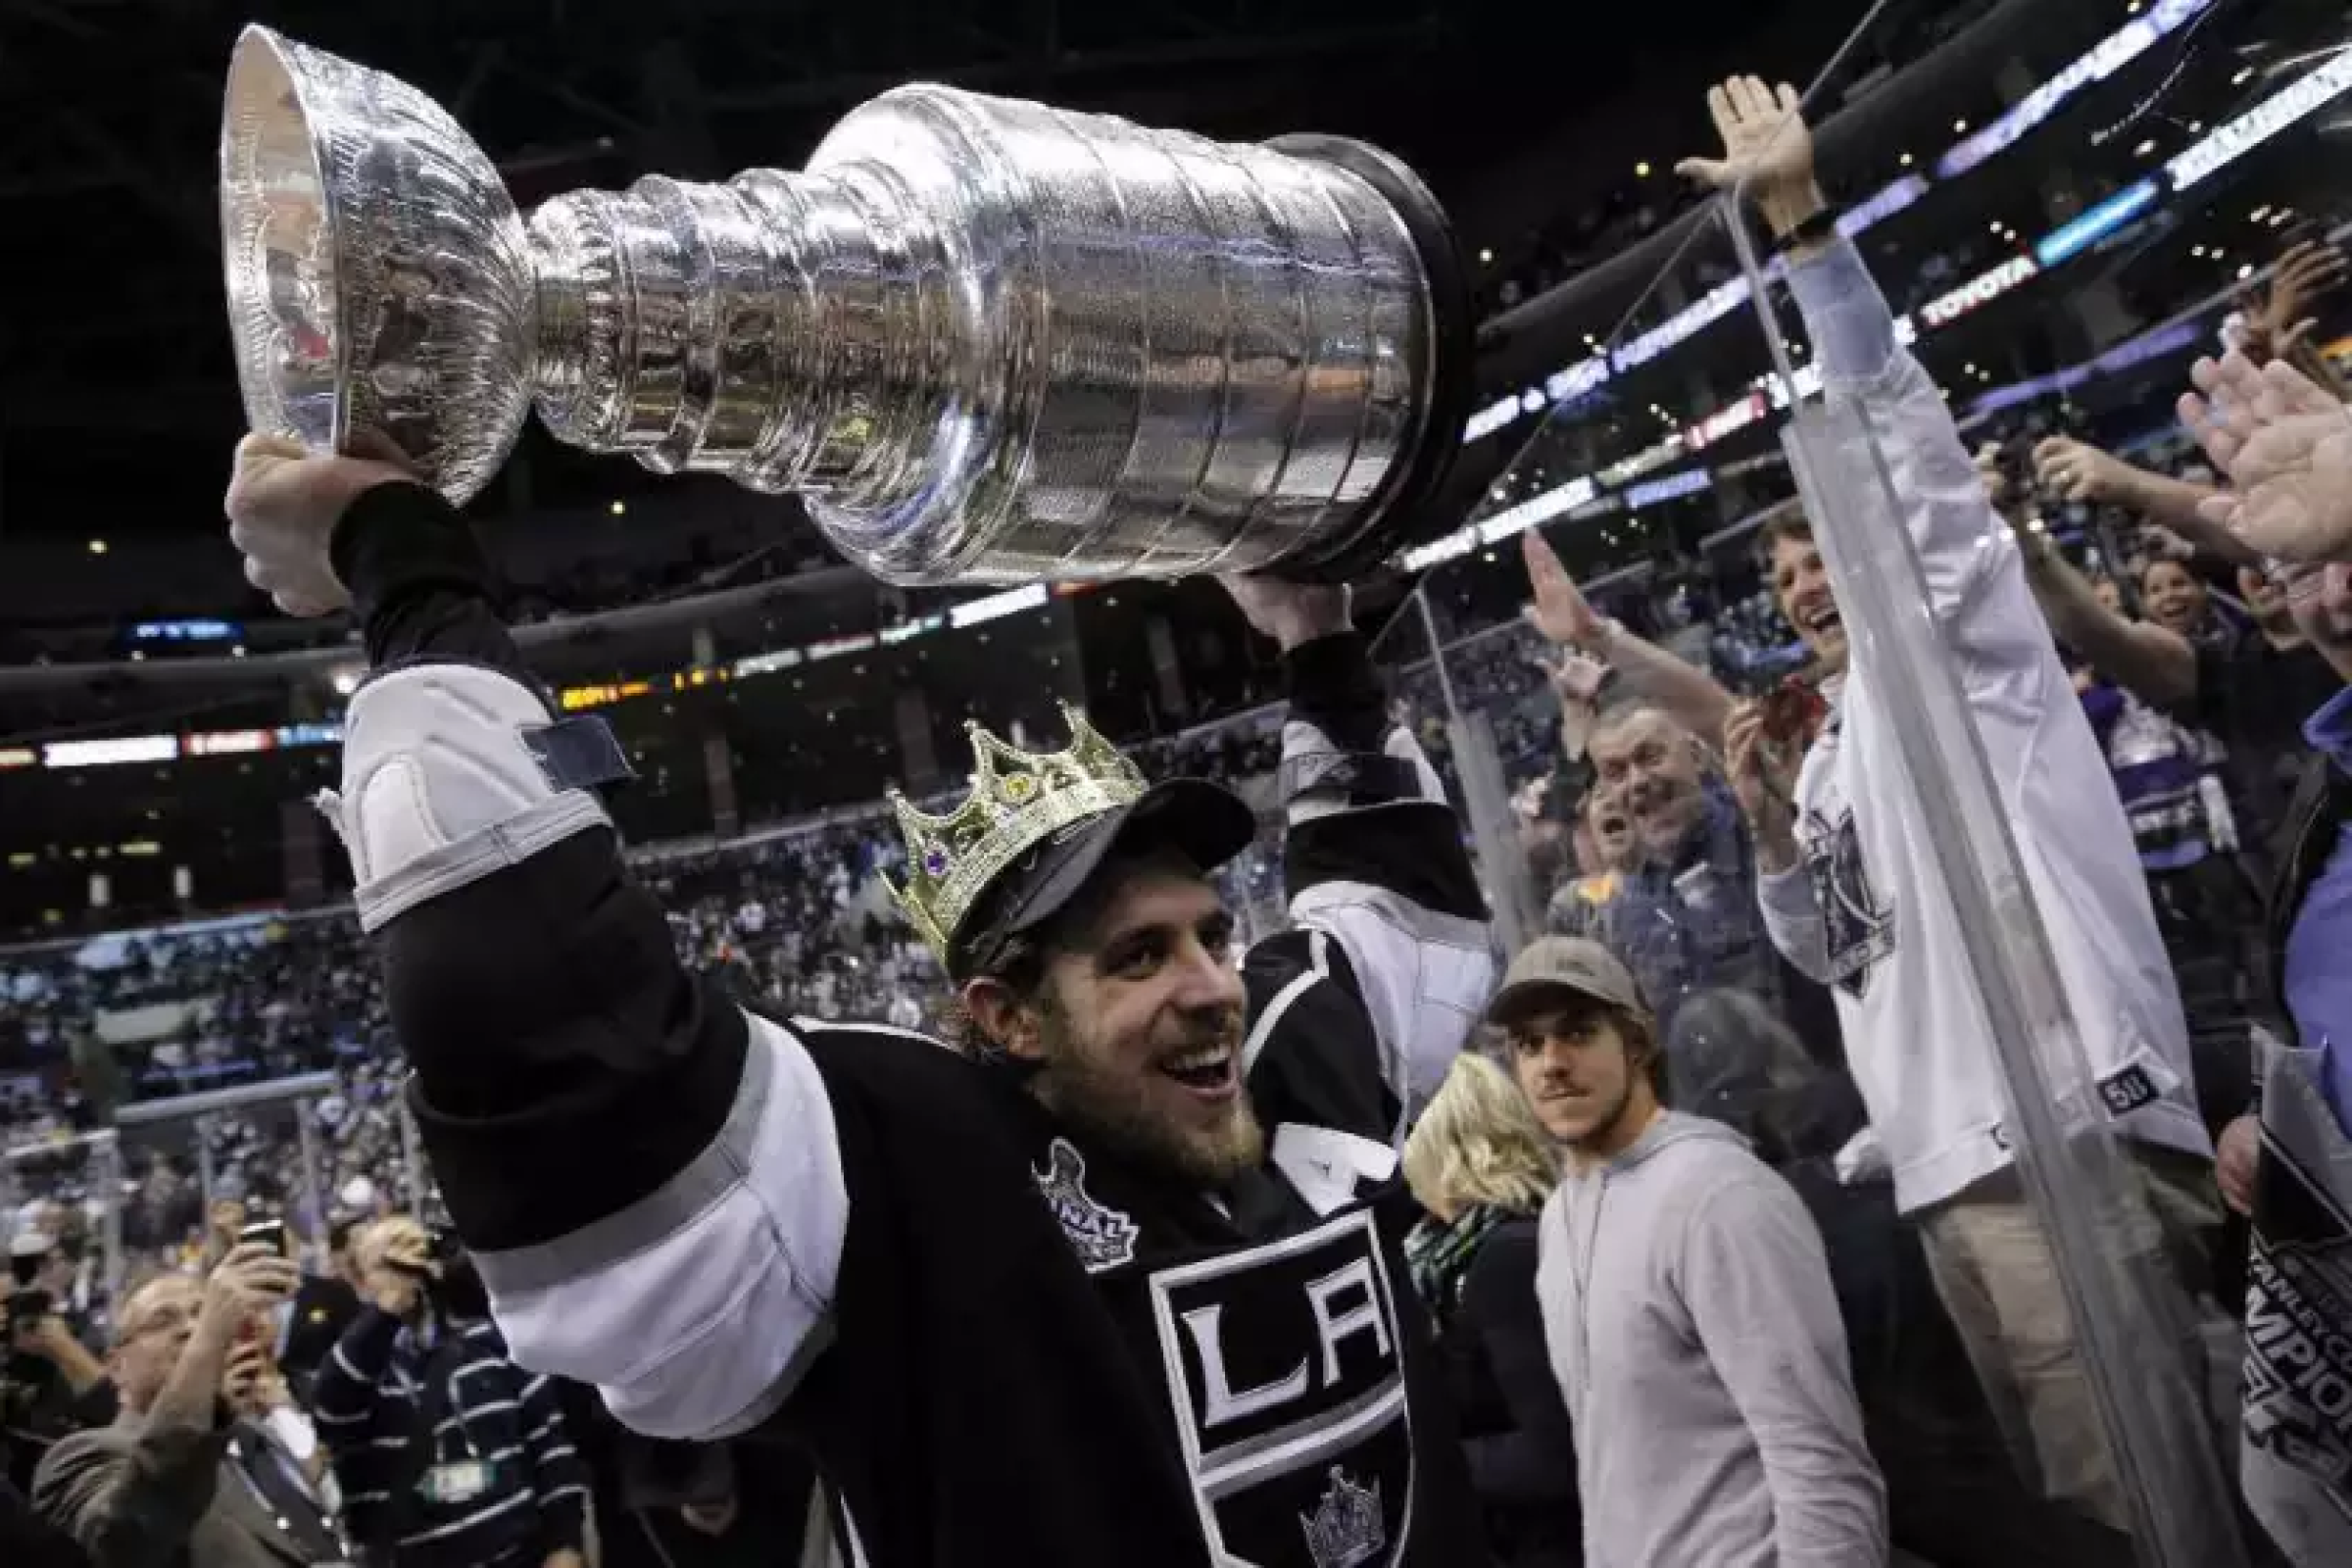 Los Angeles Kings center Anze Kopitar gives fans an up-close look at the Stanley Cup.